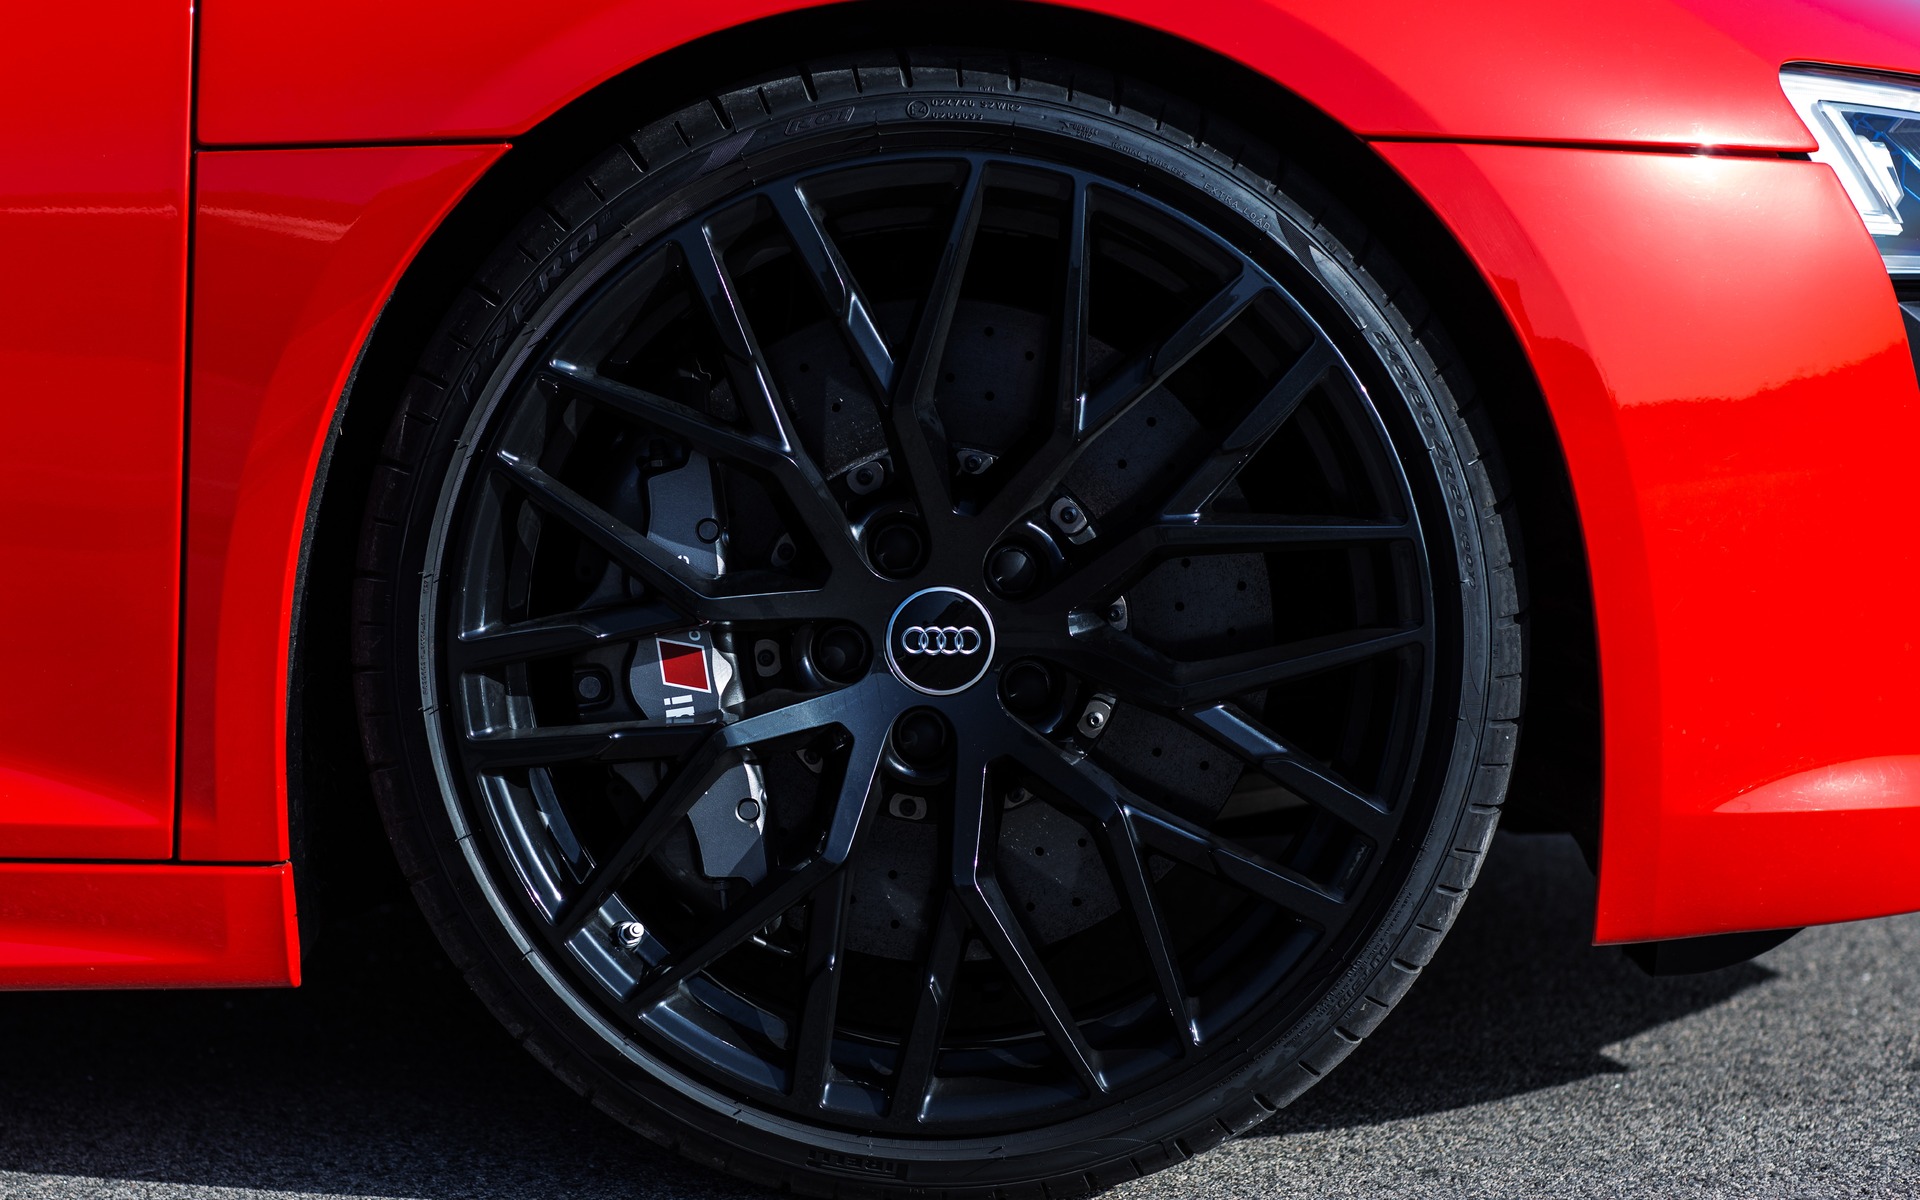 The brakes with their carbon-ceramic rotors are outstanding.